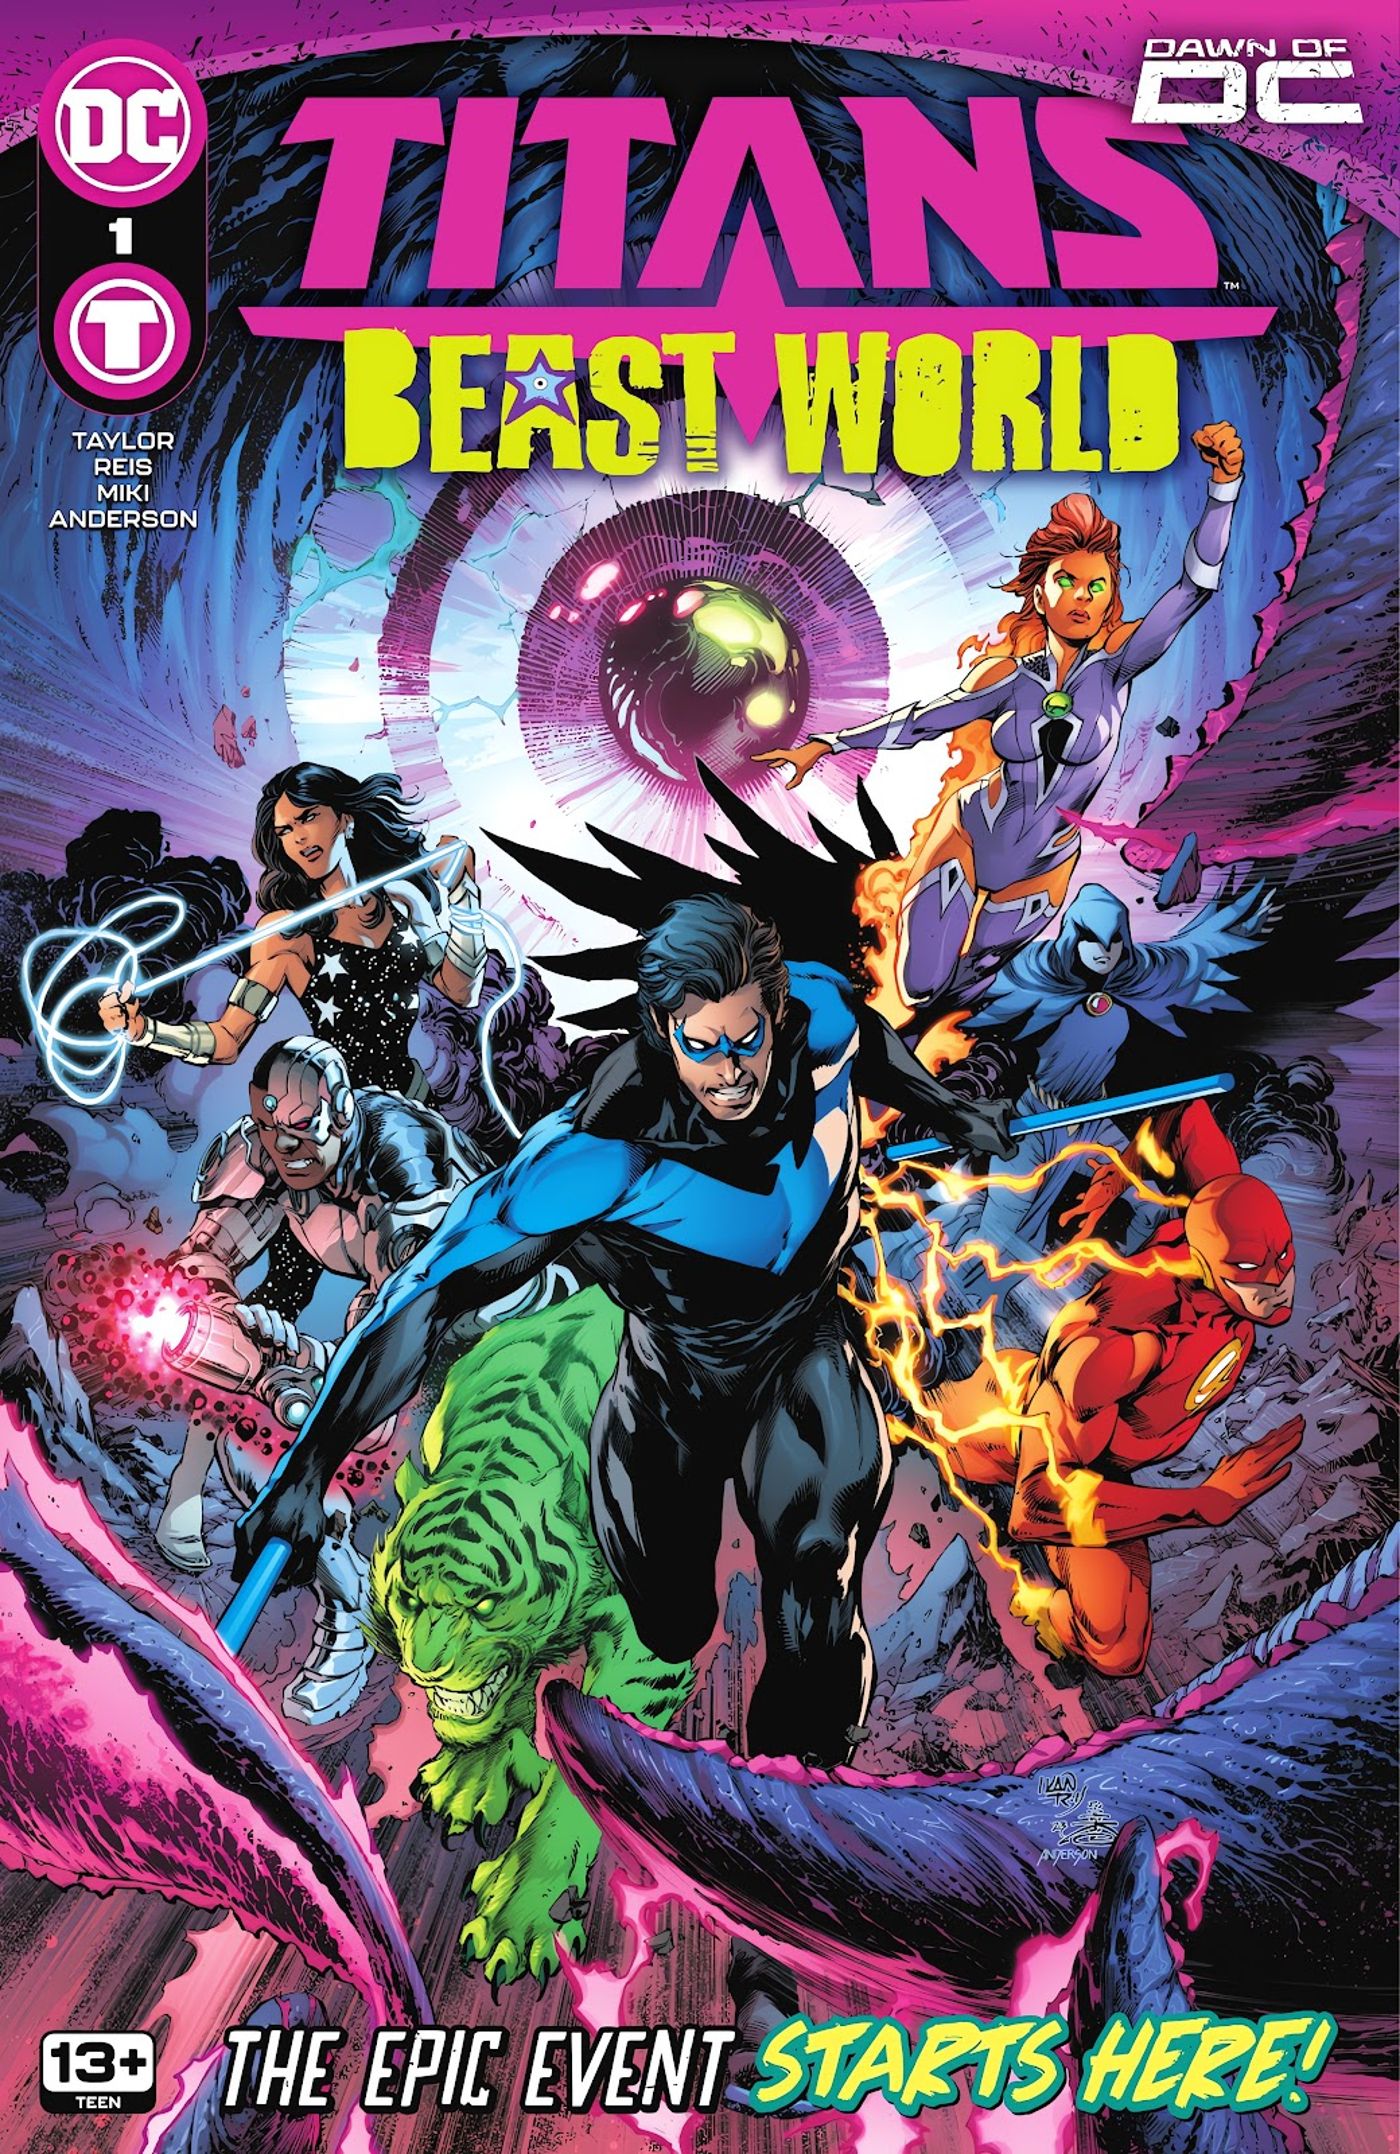 Cover for Titans: Beast World #1